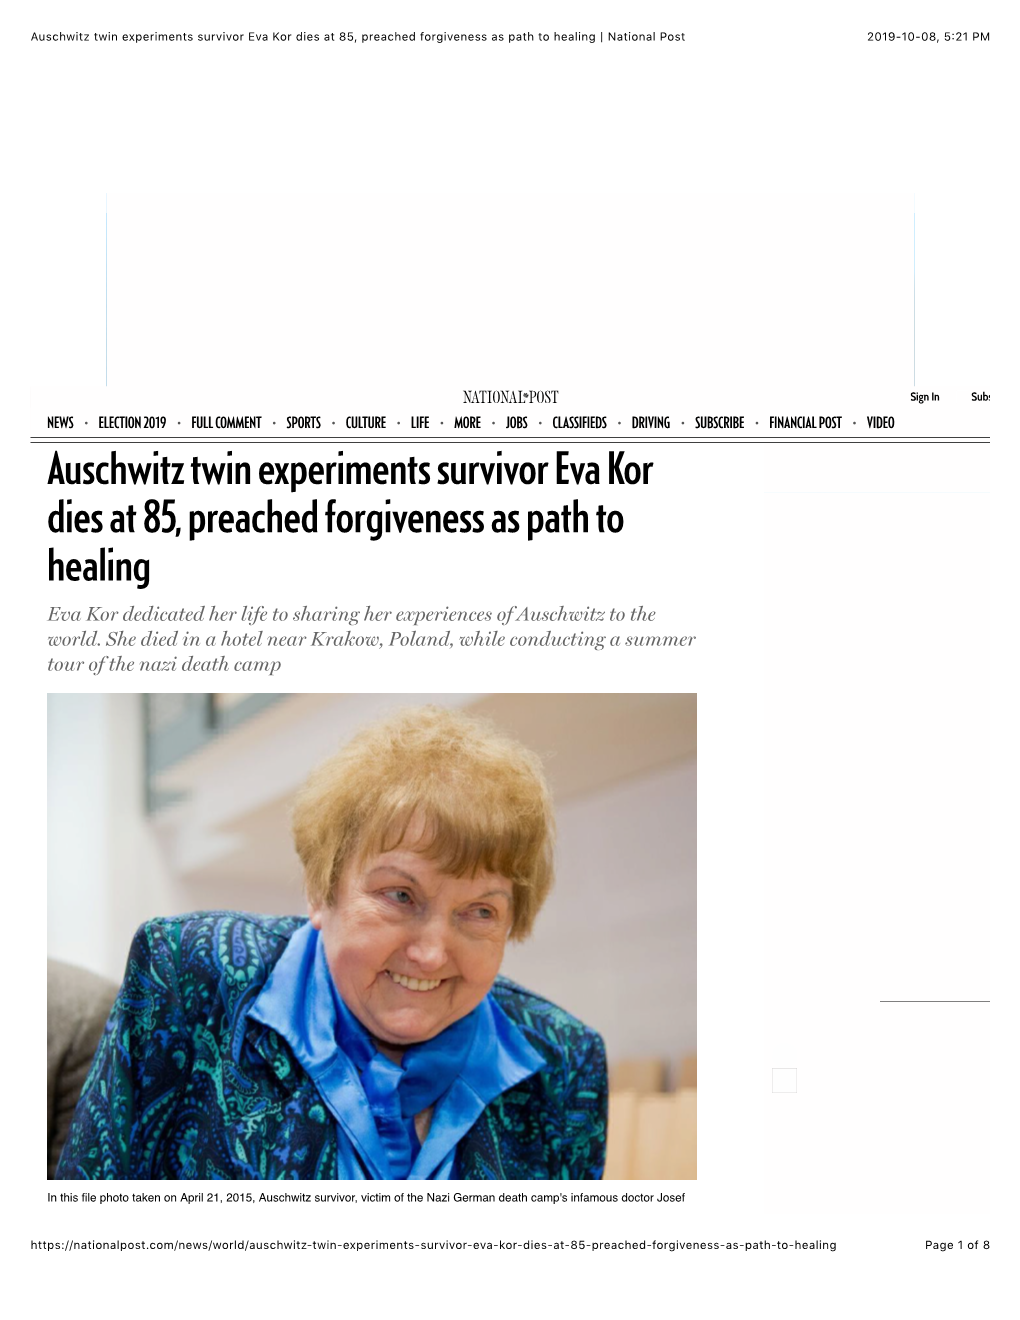 Auschwitz Twin Experiments Survivor Eva Kor Dies at 85, Preached Forgiveness As Path to Healing | National Post 2019-10-08, 5�21 PM